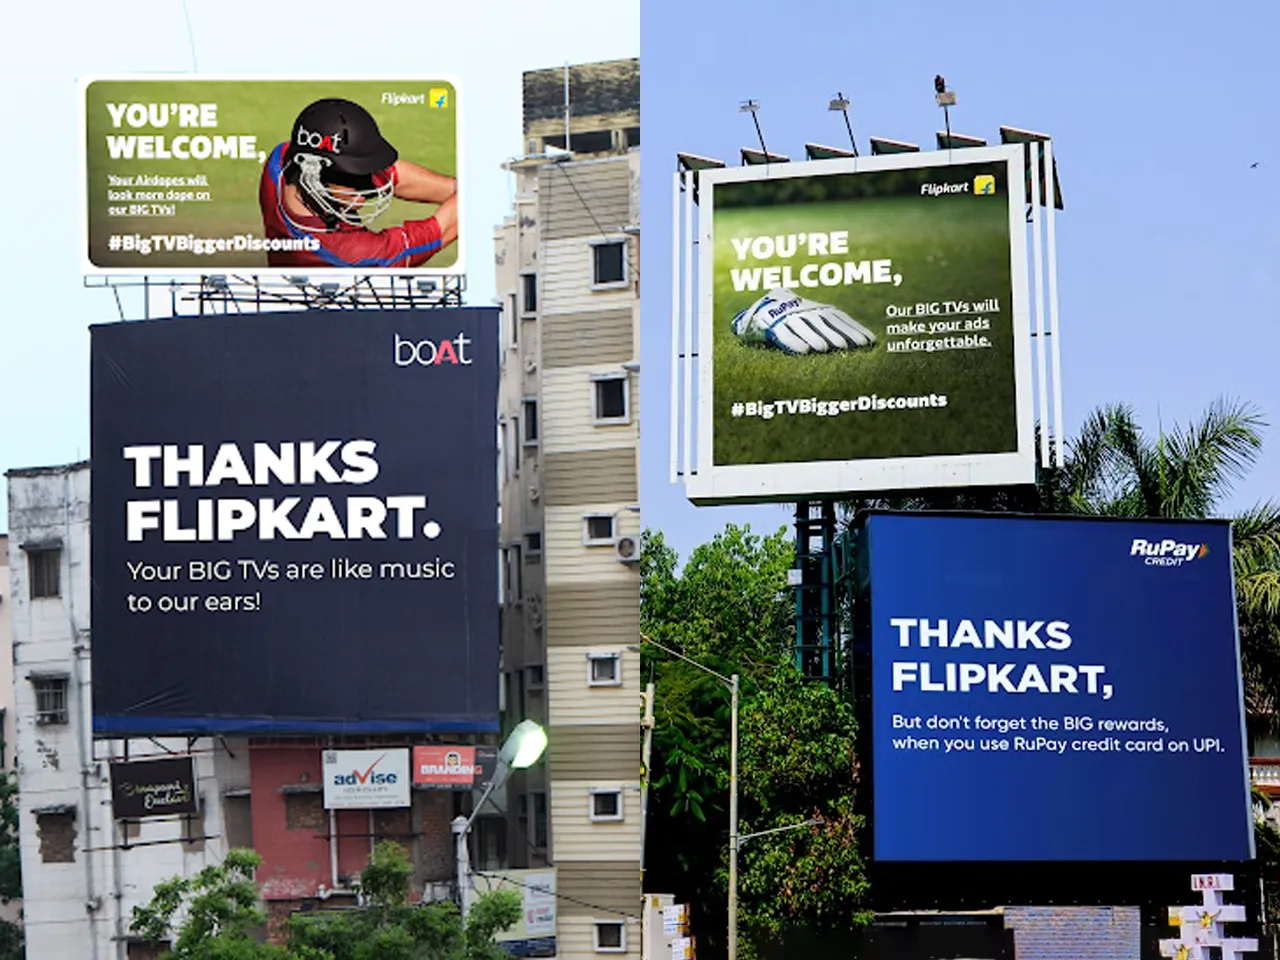 A campaign on IPL campaigns: Flipkart gets into a friendly banter with IPL sponsors